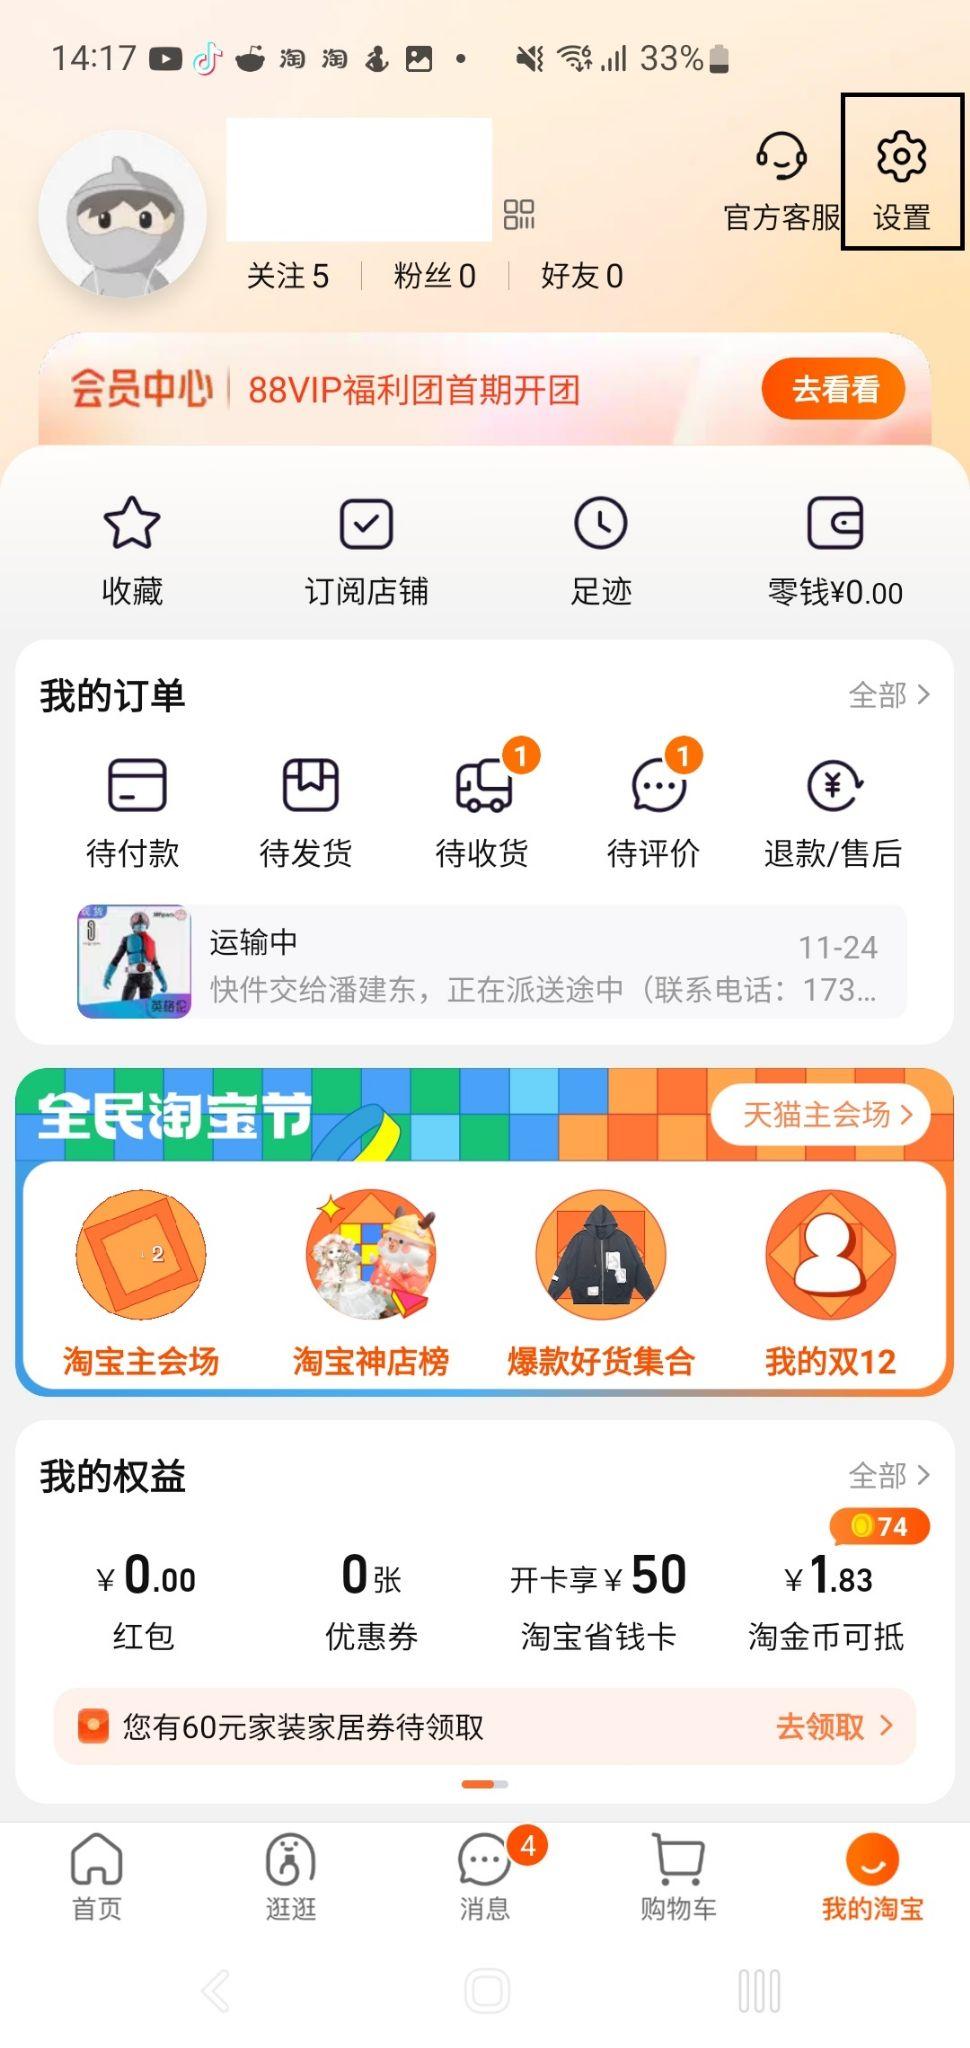 Change your password on mobile to fix Taobao login problem